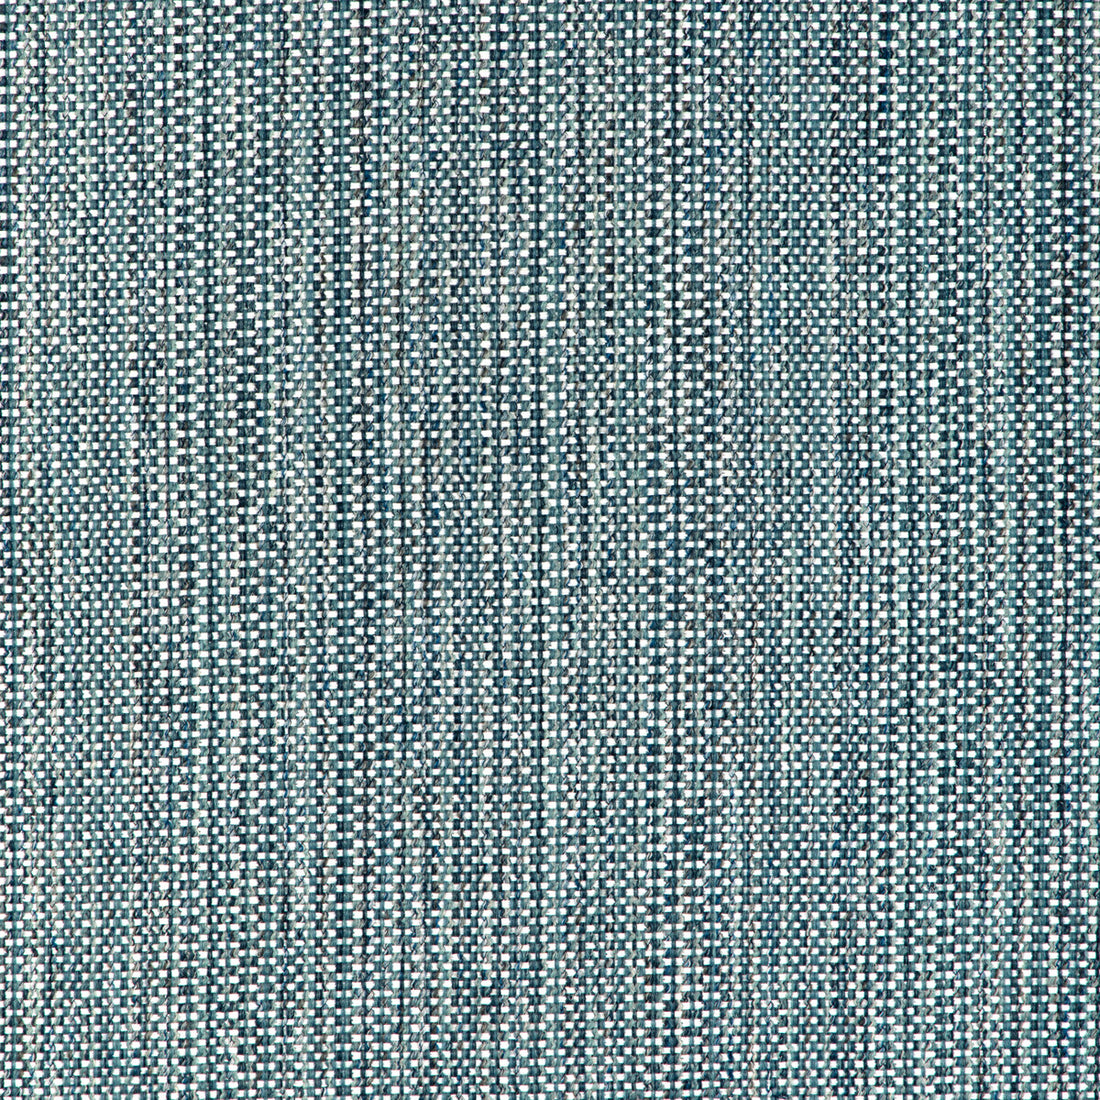 Kravet Smart fabric in 37018-550 color - pattern 37018.550.0 - by Kravet Smart in the Gis collection